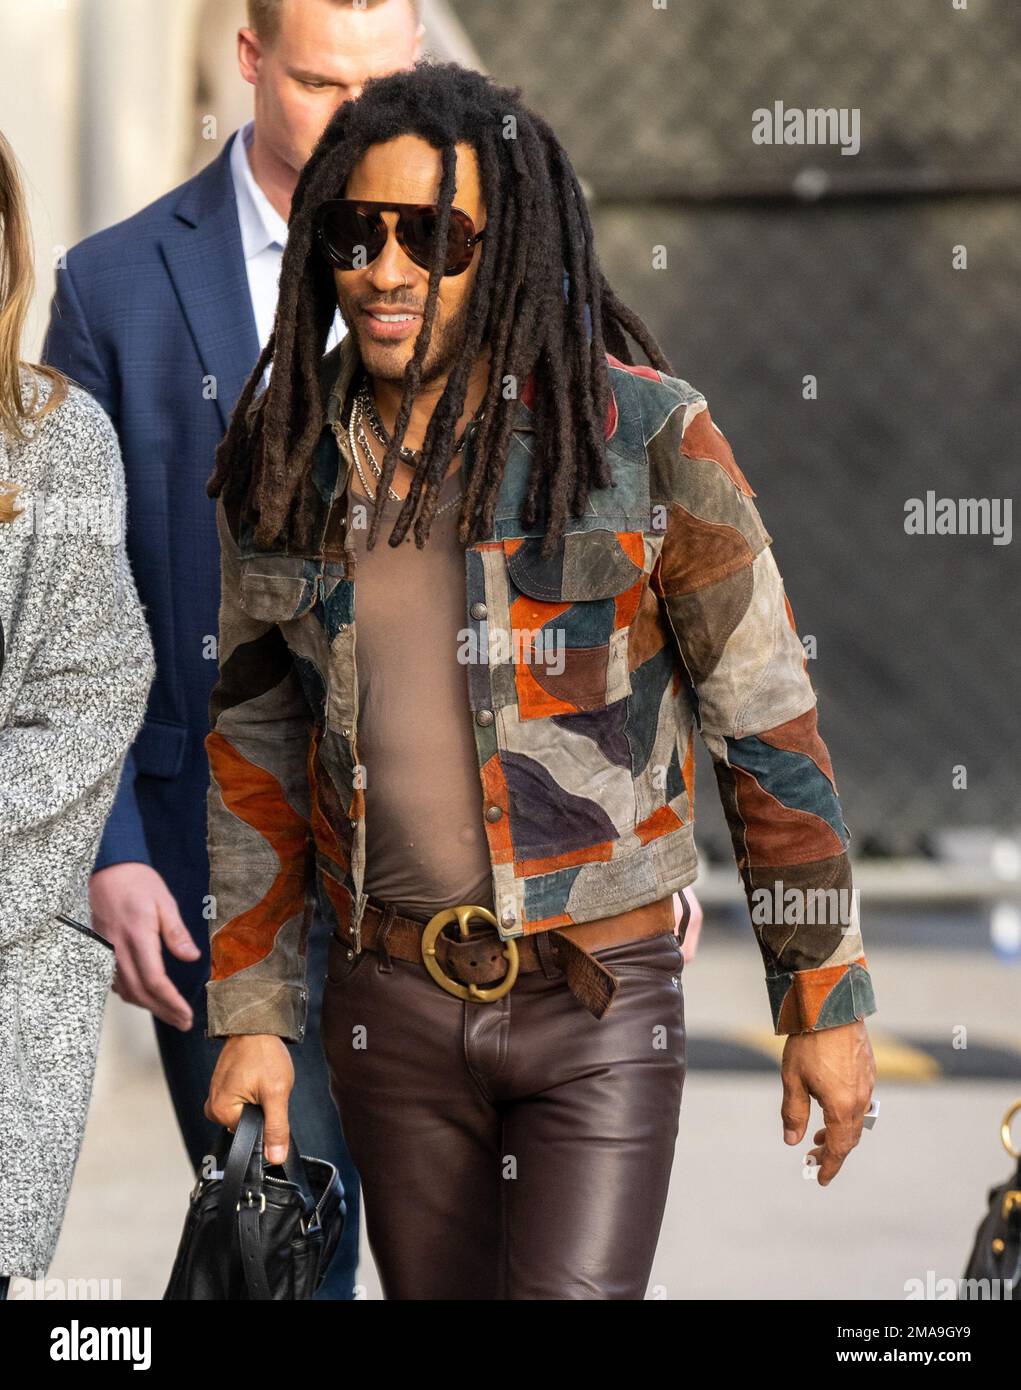 Los Angeles, California, USA. 18th January, 2023. Lenny Kravitz seen at Jimmy Kimmel Live! in Los Angeles, California. January 18, 2023. Credit: BauerGriffin/MediaPunch Credit: MediaPunch Inc/Alamy Live News Stock Photo